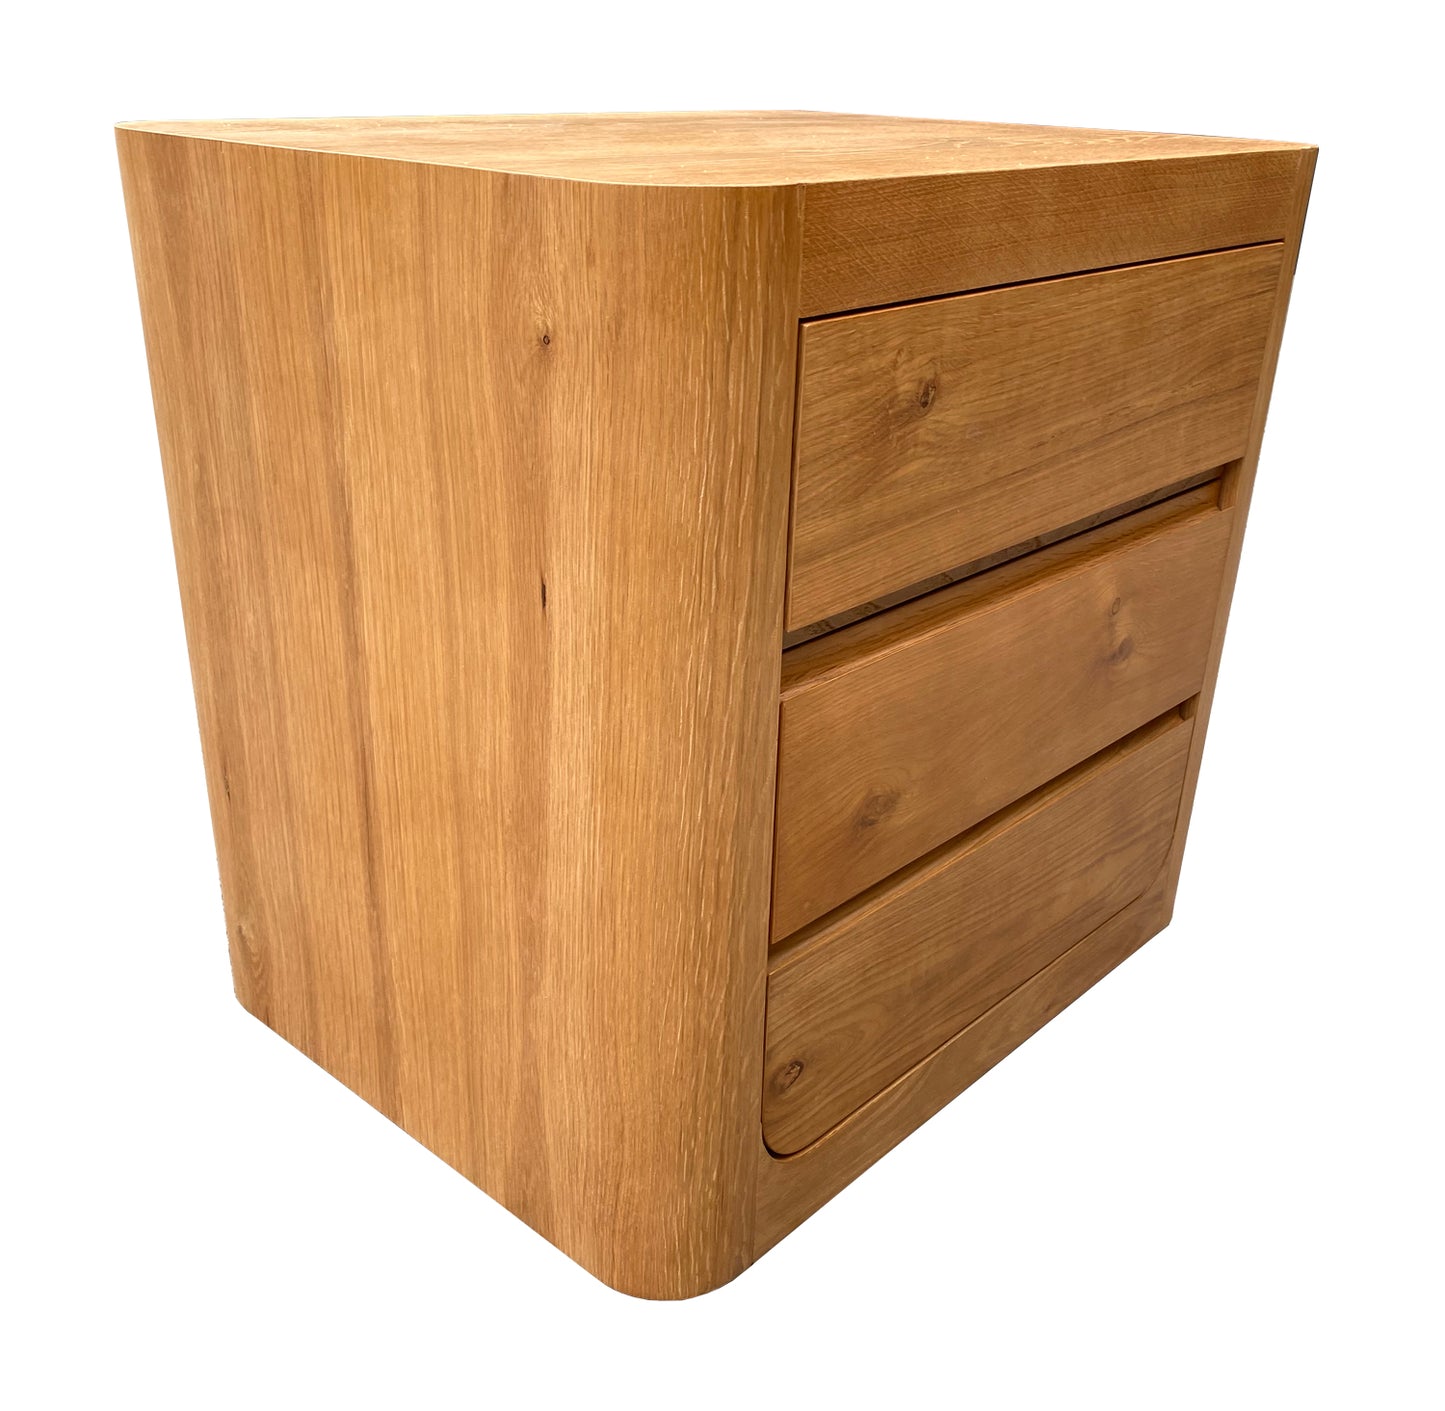 Bower Curved Oak 3 Drw Bedside Table - Natural